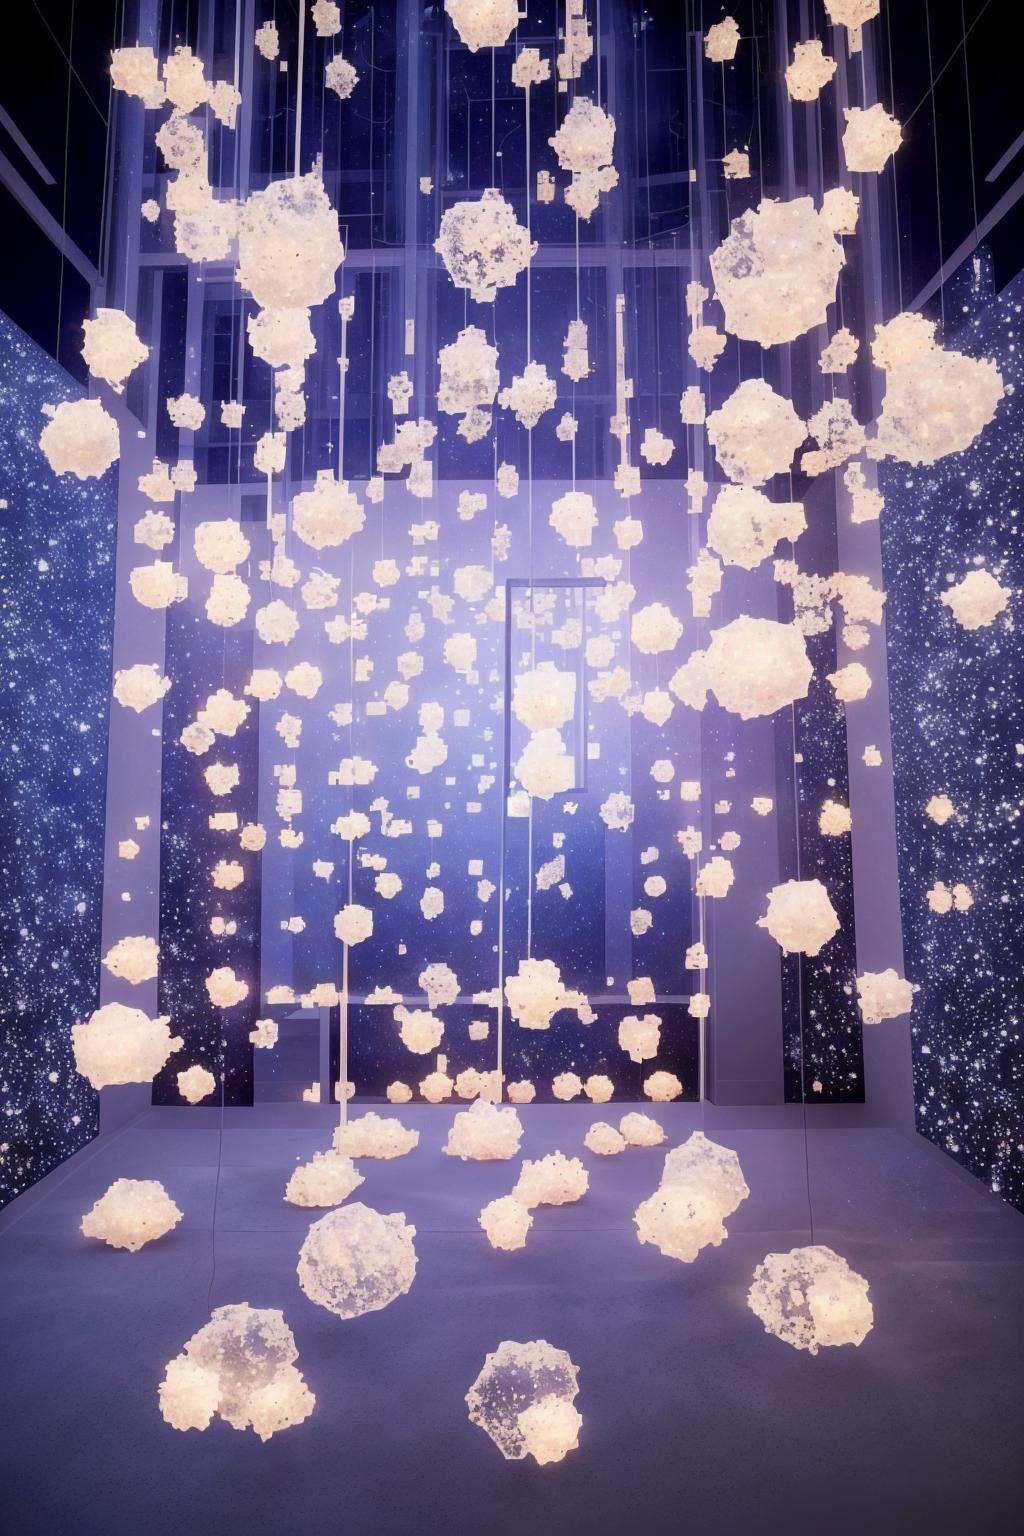 Installation: A room filled with suspended glass orbs, each containing a softly pulsating light, creating an ethereal constellation of luminescence. ,  con_art2